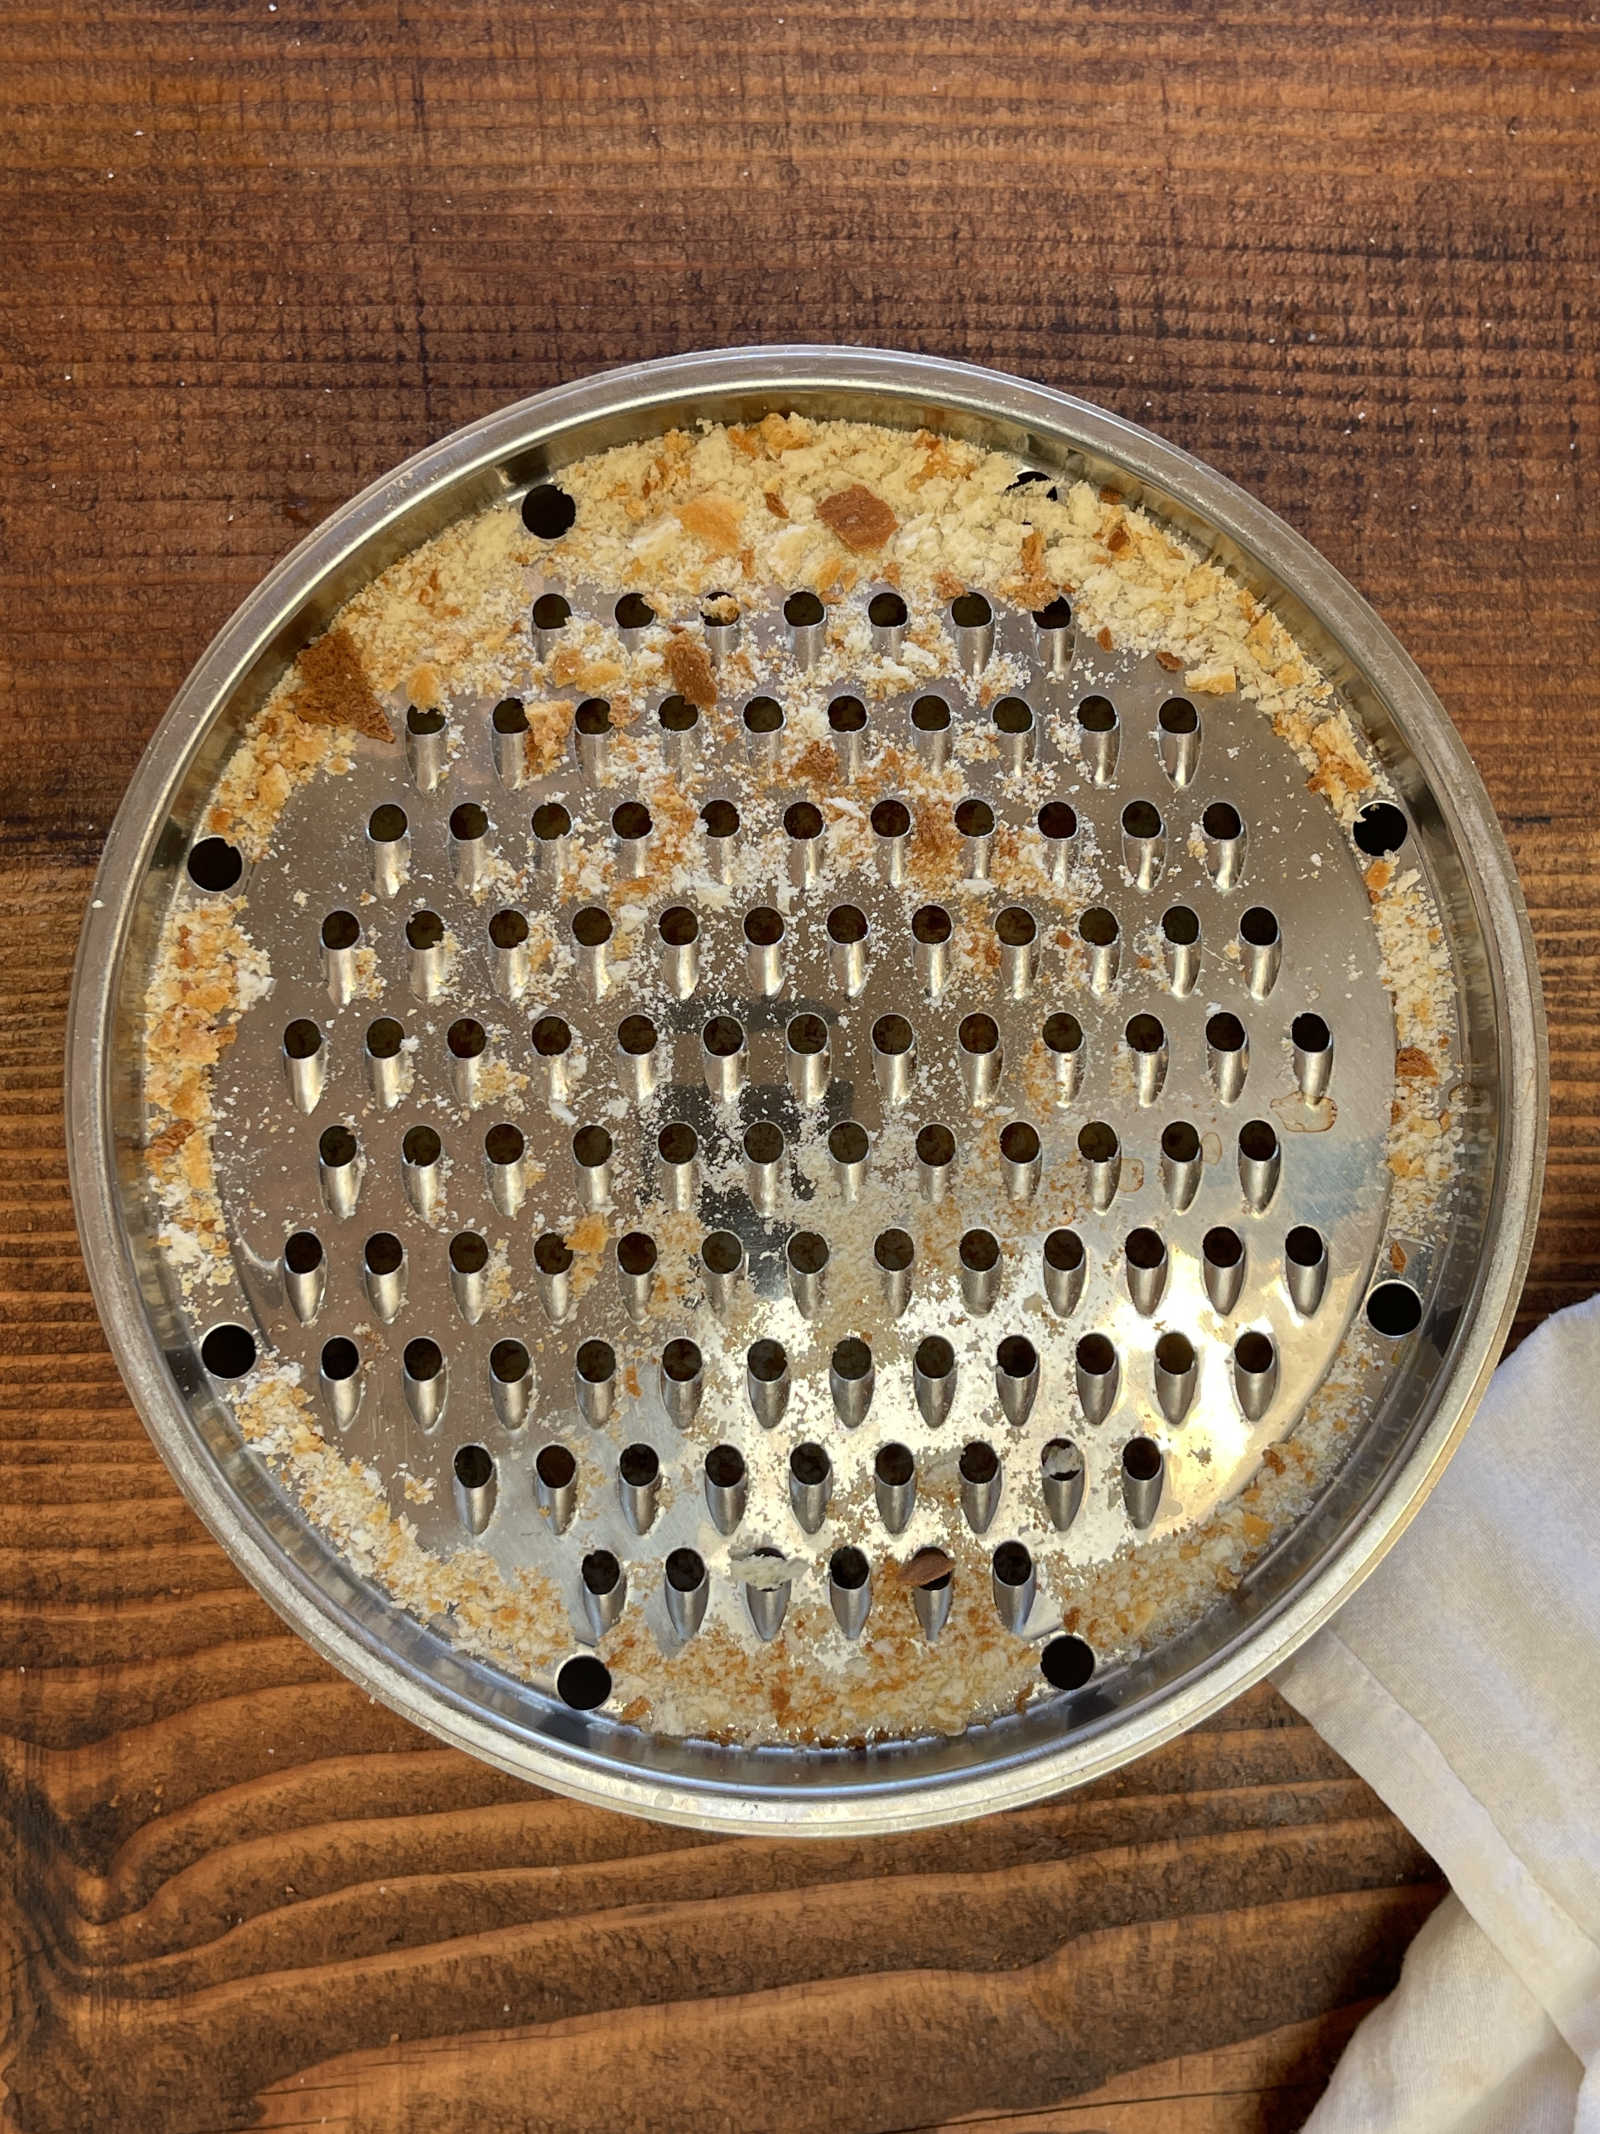 Breadcrumbs scattered on the disk of a metal cheese grater. The grater sits on dark wood.